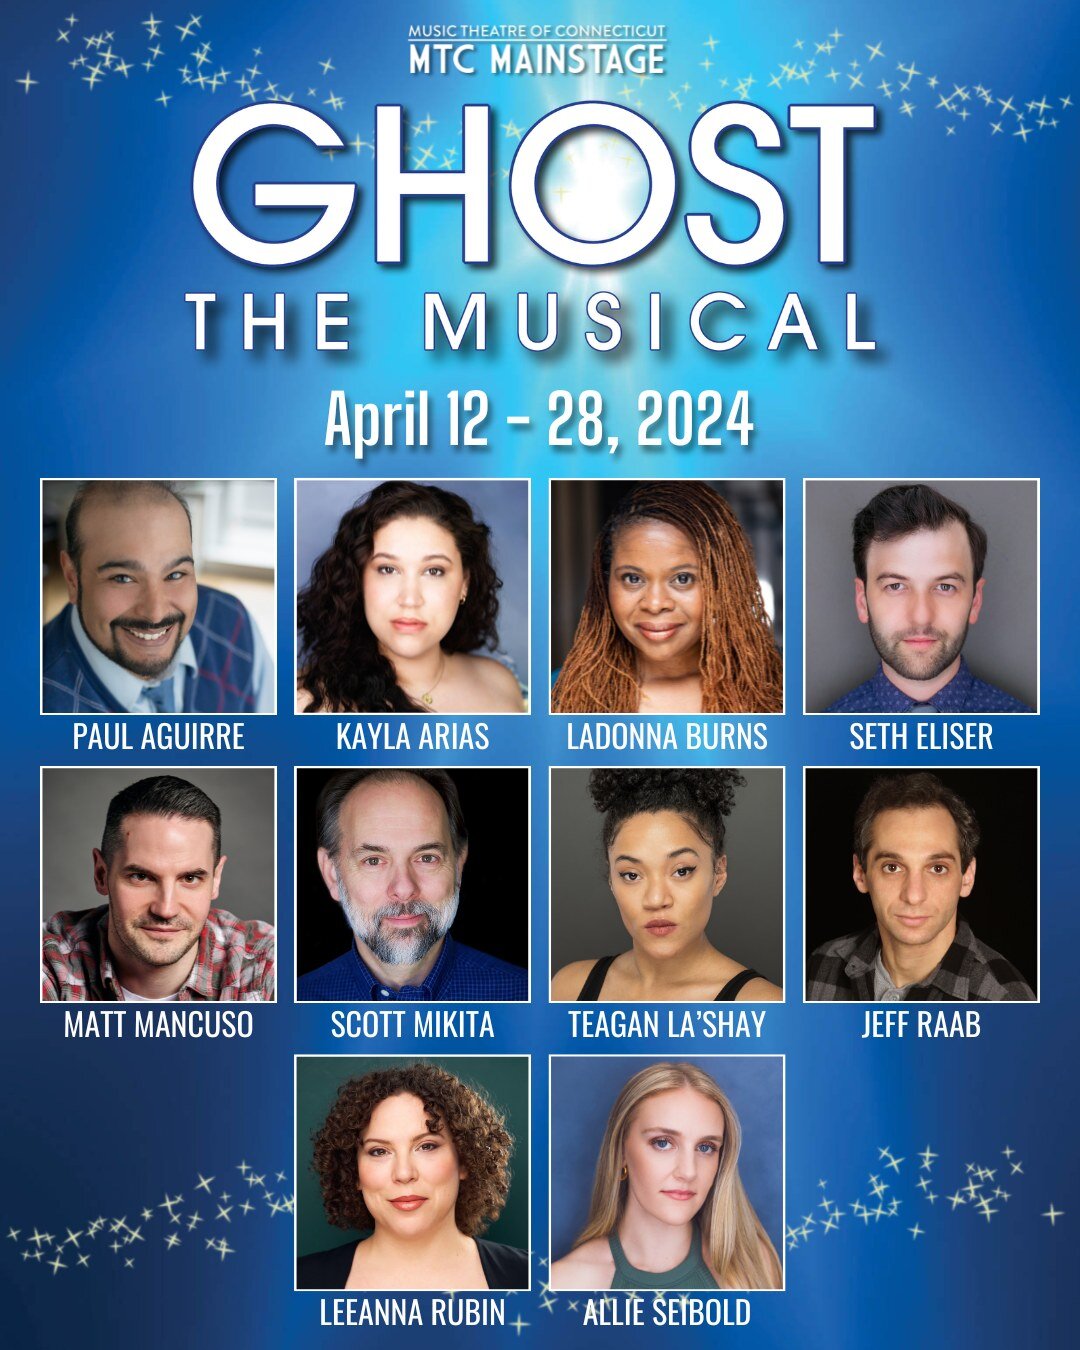 ✨💙ANNOUNCING THE CAST OF GHOST!💙✨

We are thrilled to announce the cast for the final production of MTC's 37th MainStage Season, GHOST THE MUSICAL!

ALLIE SEIBOLD (Tour: Lighting Thief, Footloose) returns to MTC as Molly alongside her husband, SETH